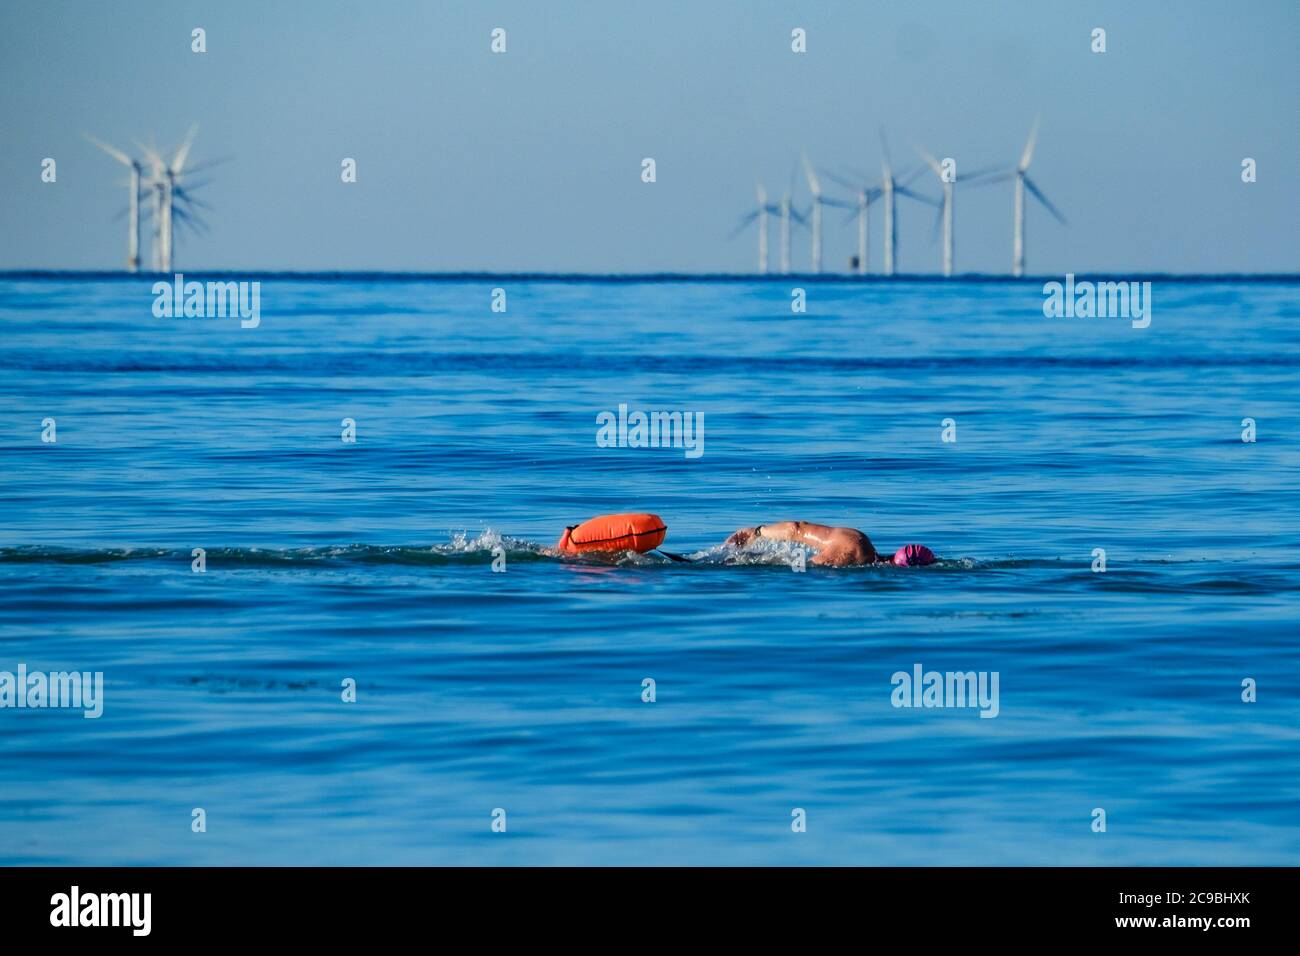 Worthing Beach, Worthing, UK. 30th July, 2020. Open water swimmers enjoy the calm morning sea . With a clear blue sky and flat waters people on paddle boards enjoy the early morning off the sussex coast. Rampion Wind Farm can be seen 13-20km offshore. Picture by Credit: Julie Edwards/Alamy Live News Stock Photo